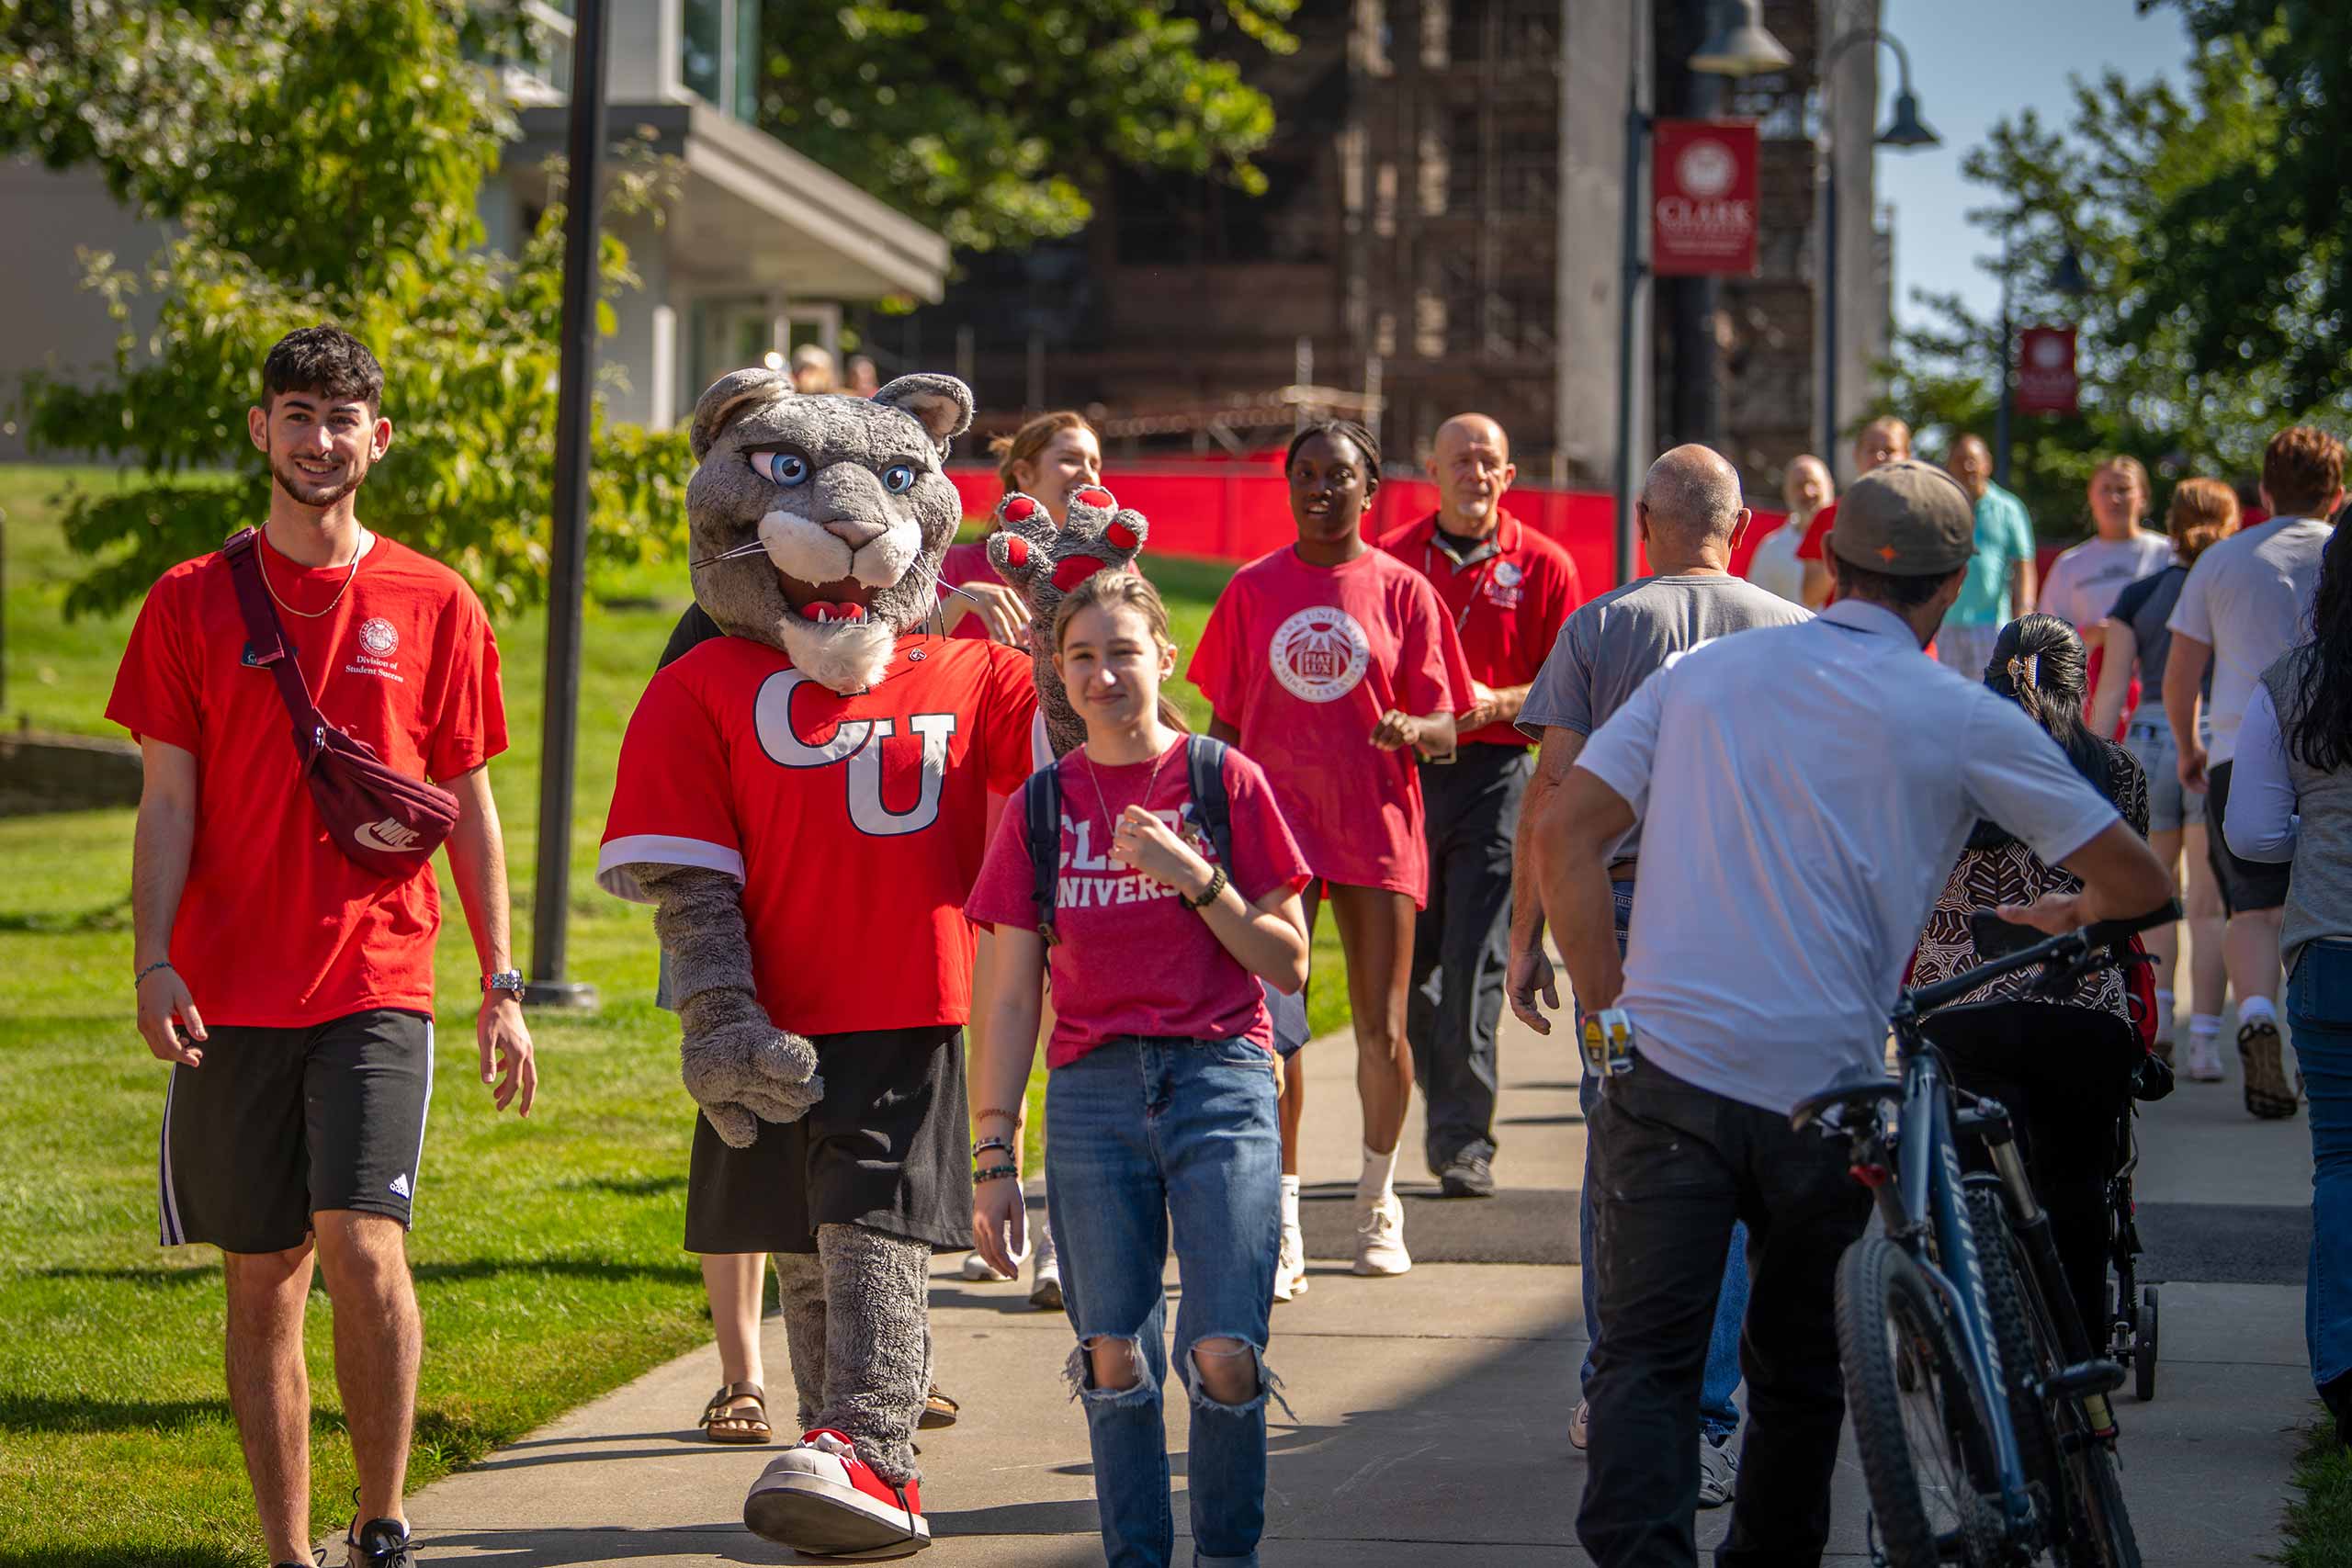 Thecougar walking on a crowded sidewalk with students and families